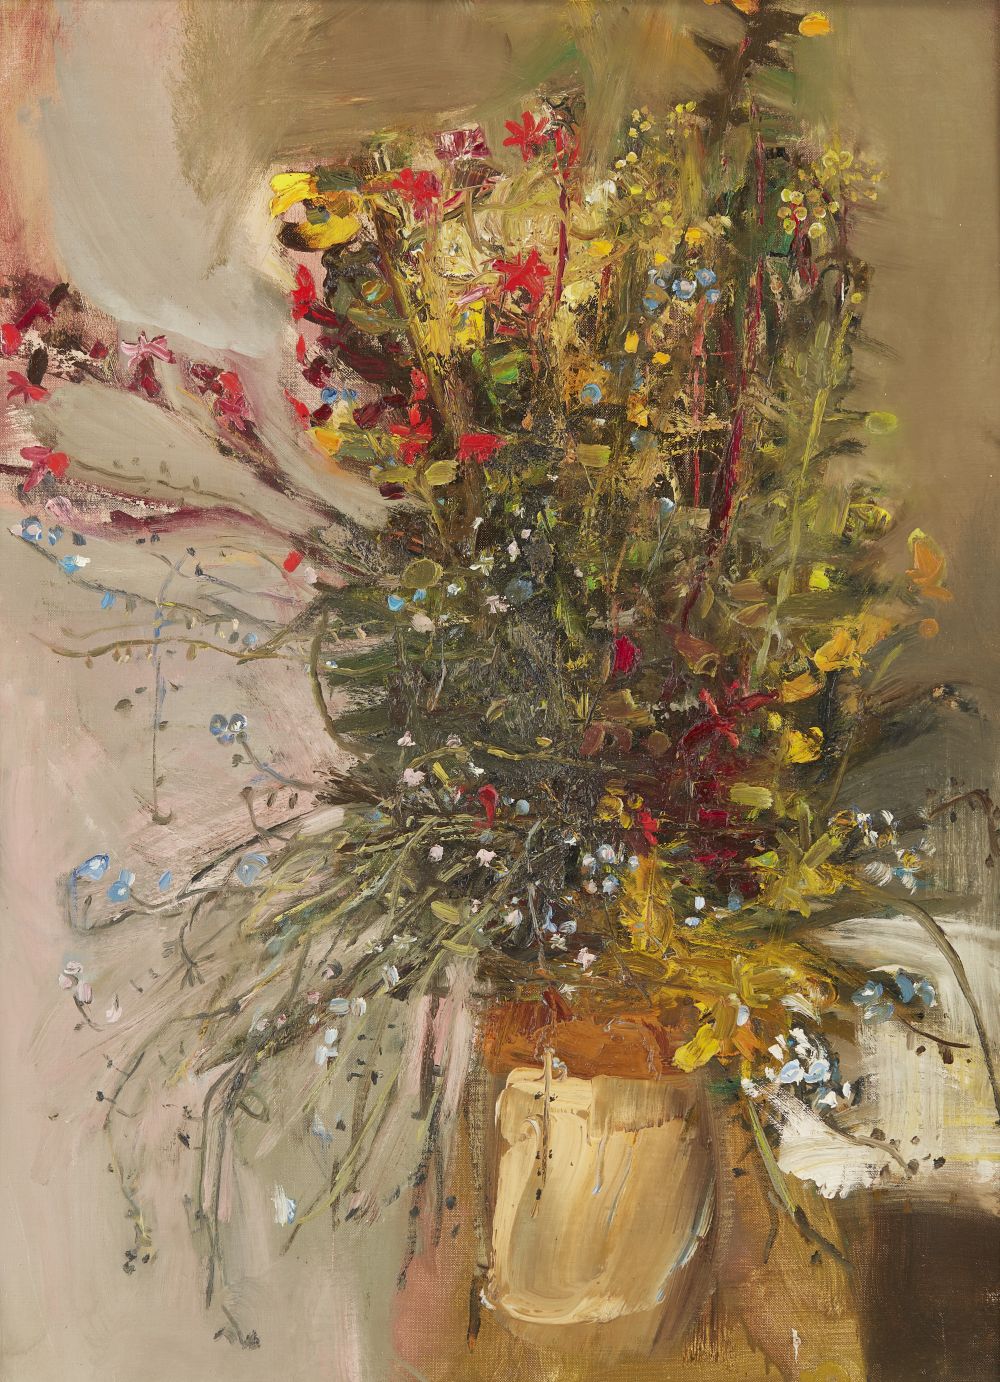 Joan Eardley R.S.A (Scottish 1921-1963) | Jar of Summer Flower, 1963 | Inscribed with the inventory number EE89, oil on canvas | 76cm x 56cm (30in x 22in) | £30,000 - 50,000 + fees